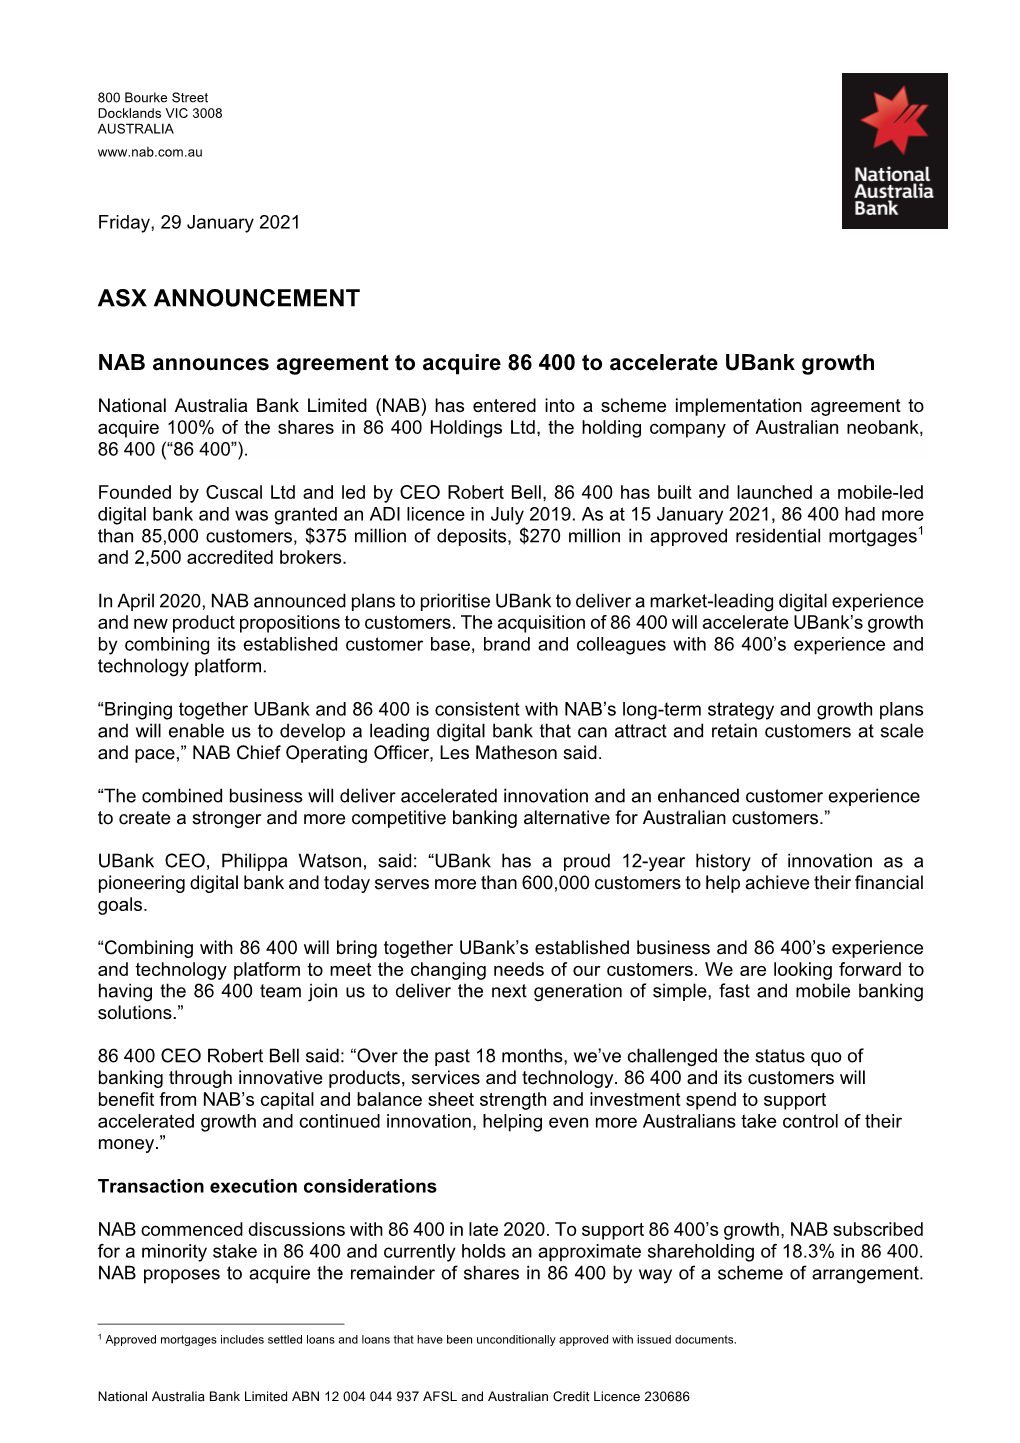 NAB Announces Agreement to Acquire 86 400 to Accelerate Ubank Growth